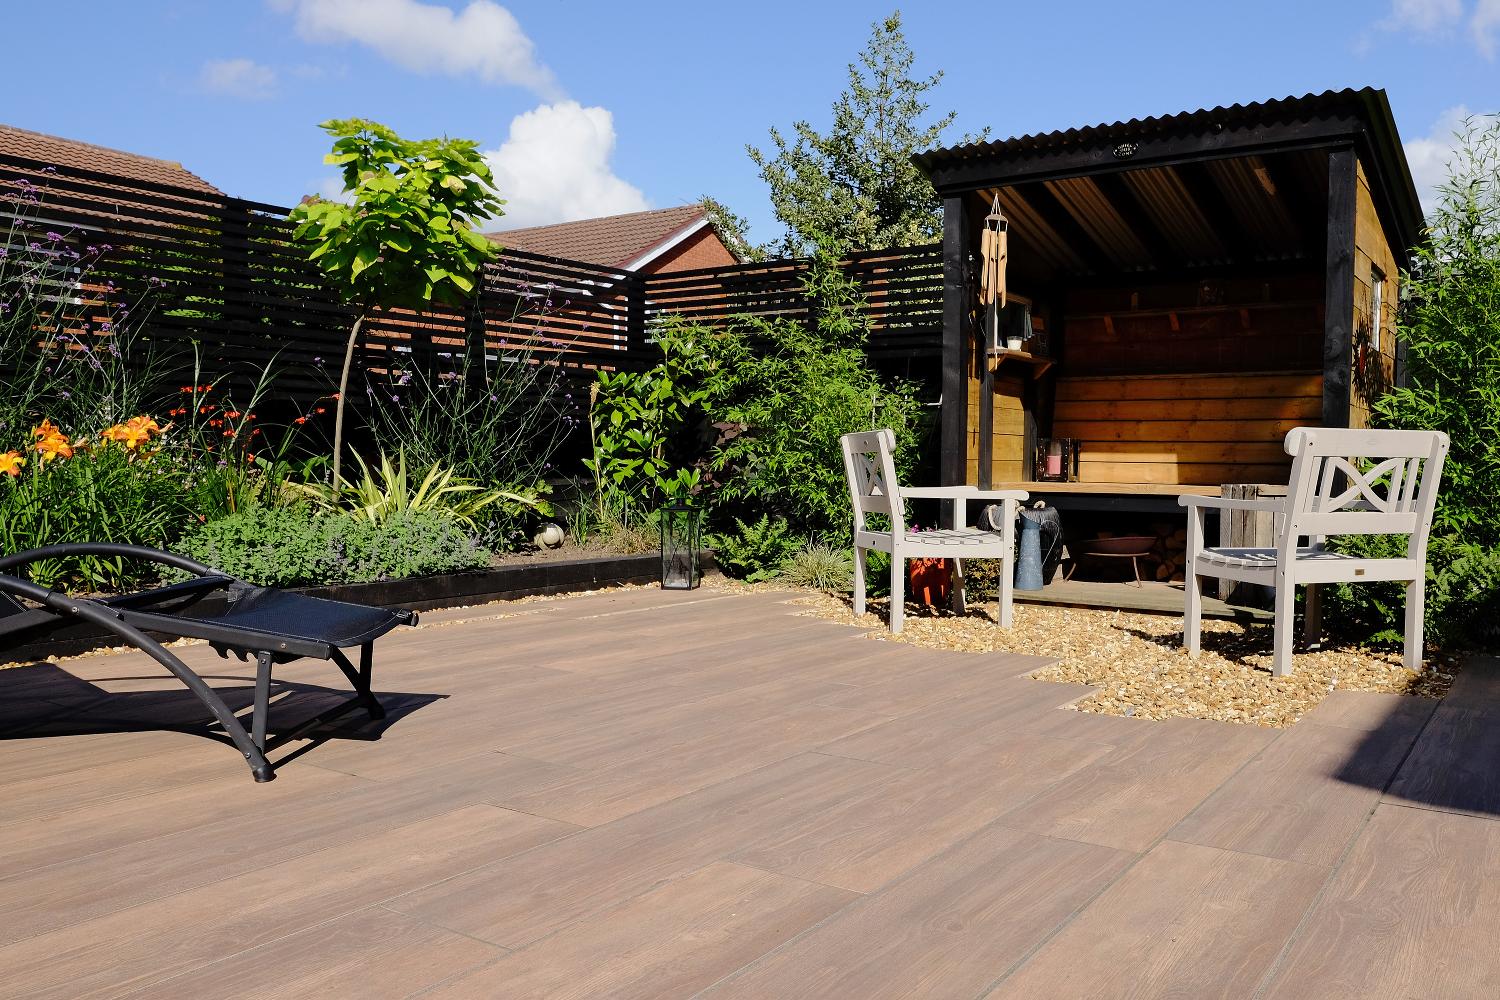 A wooden outdoor seating area